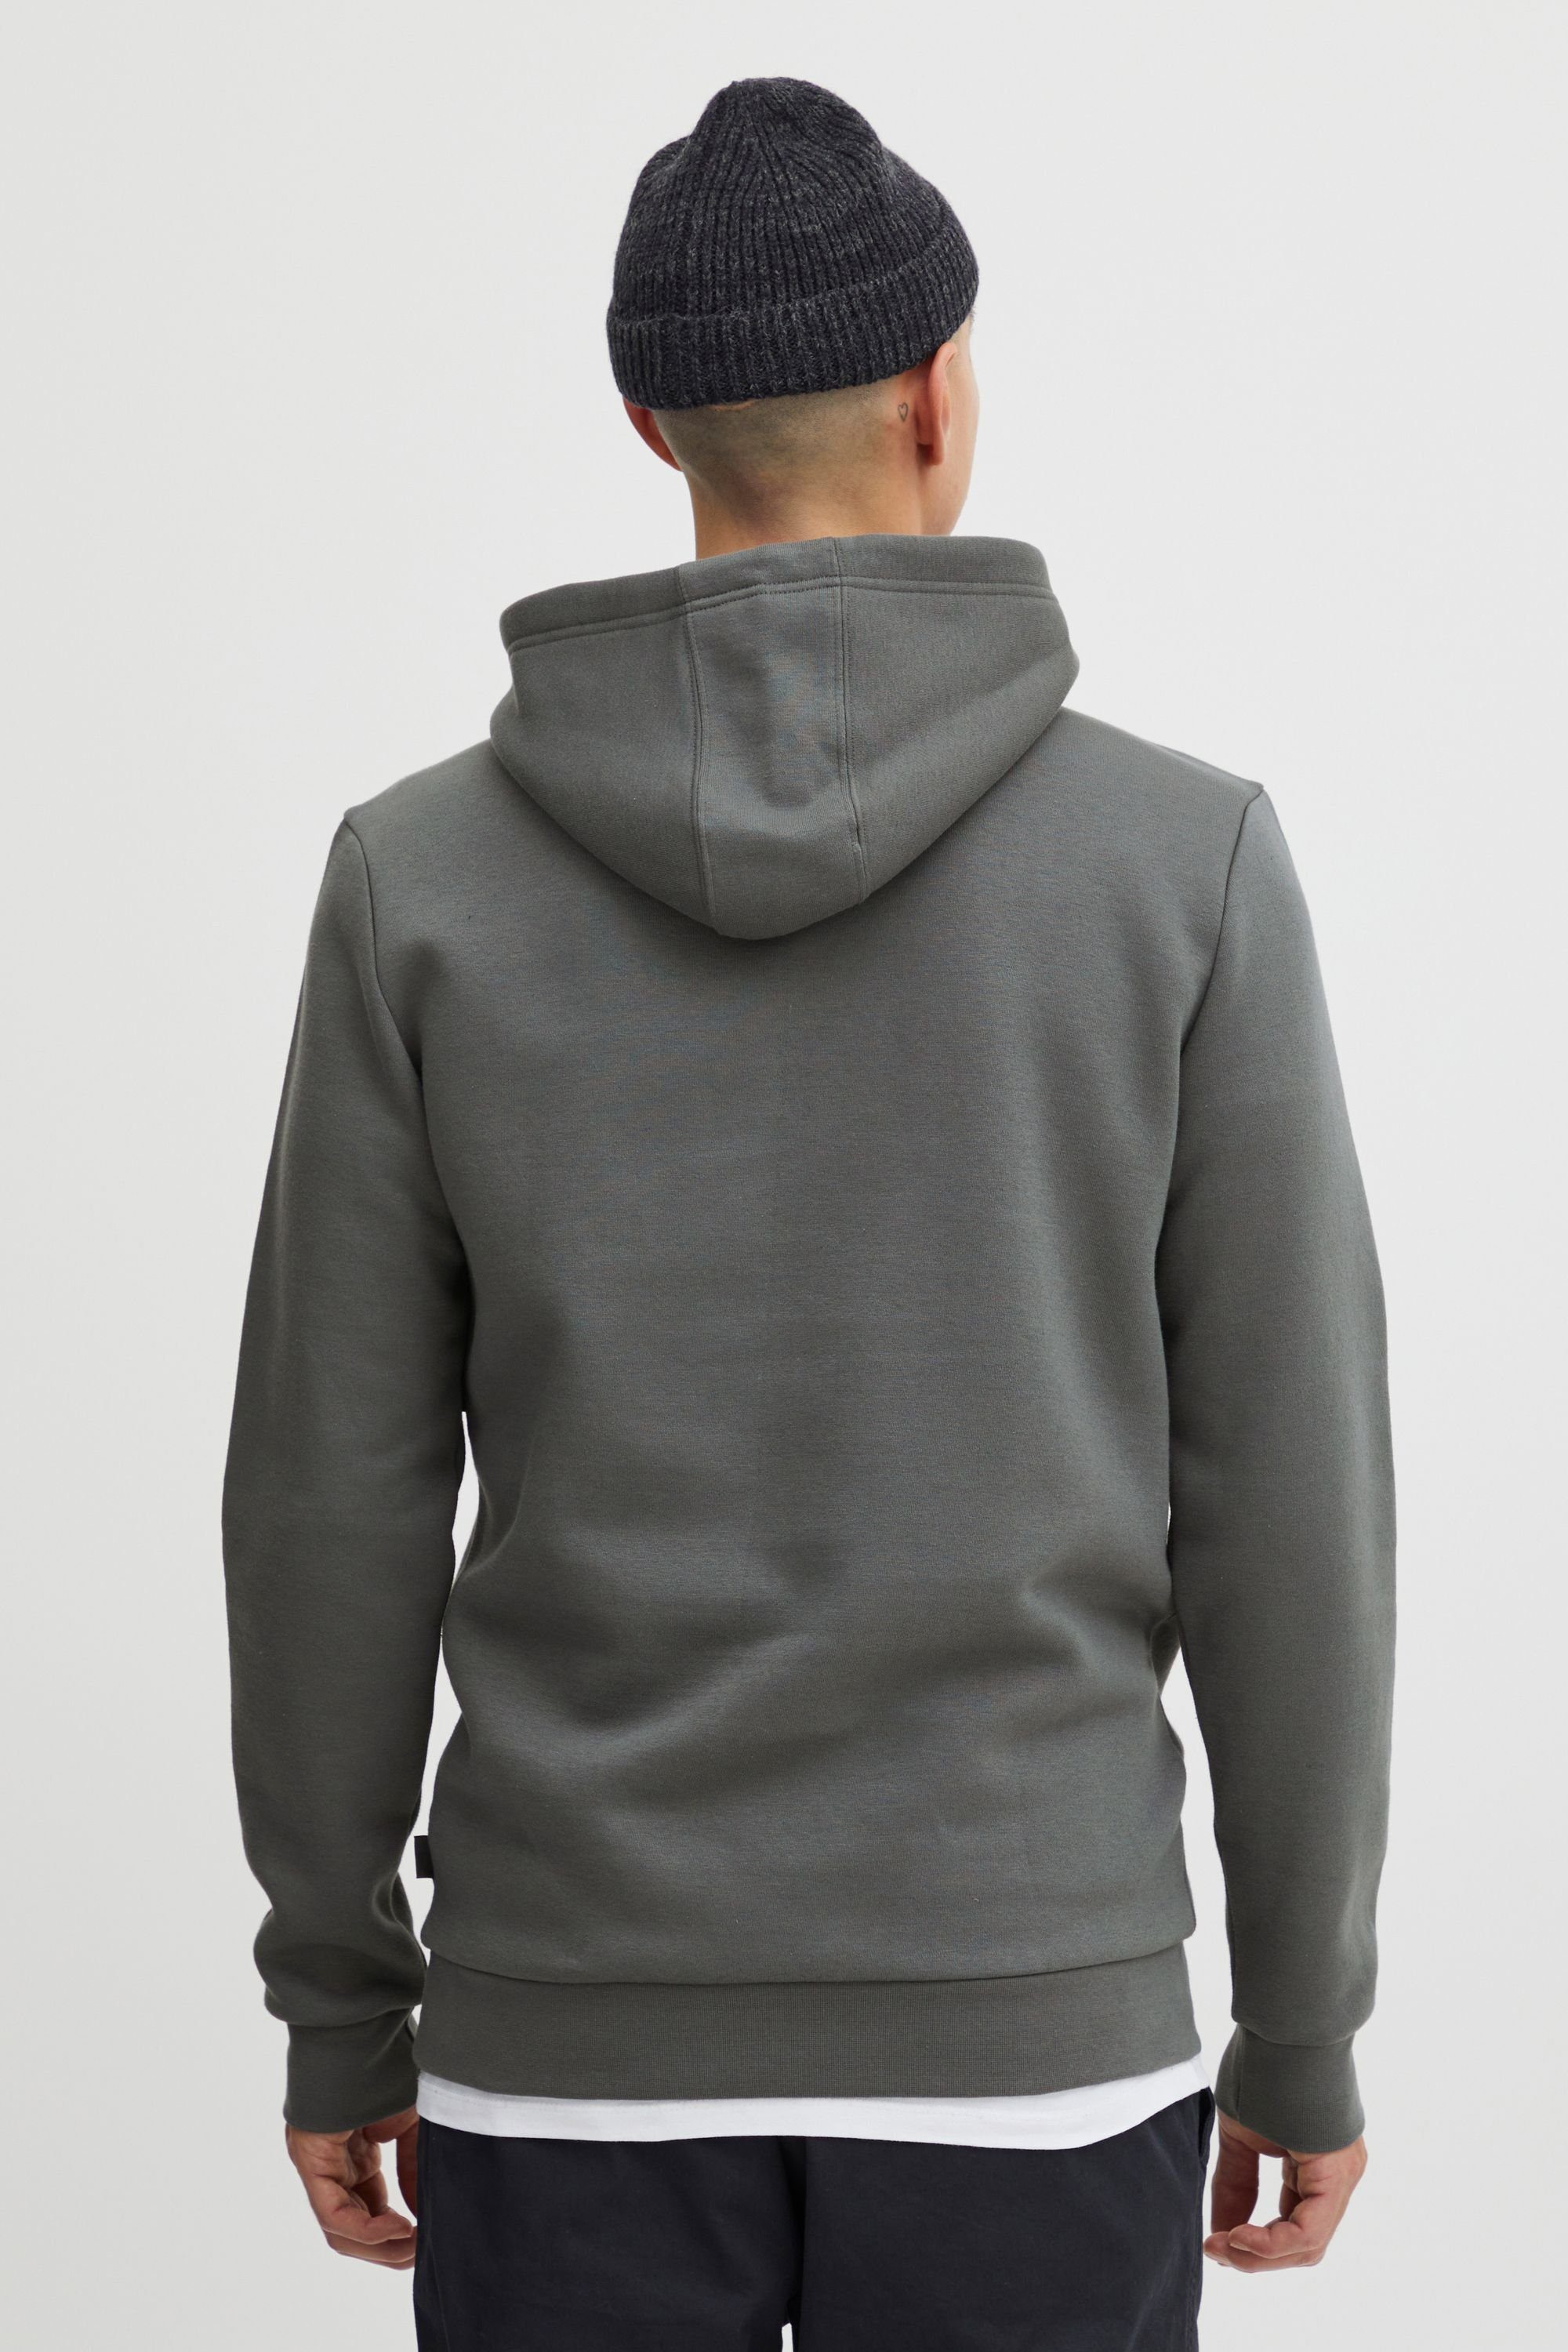 Iron 11 Project PRAnno Gate Hoodie Project 11